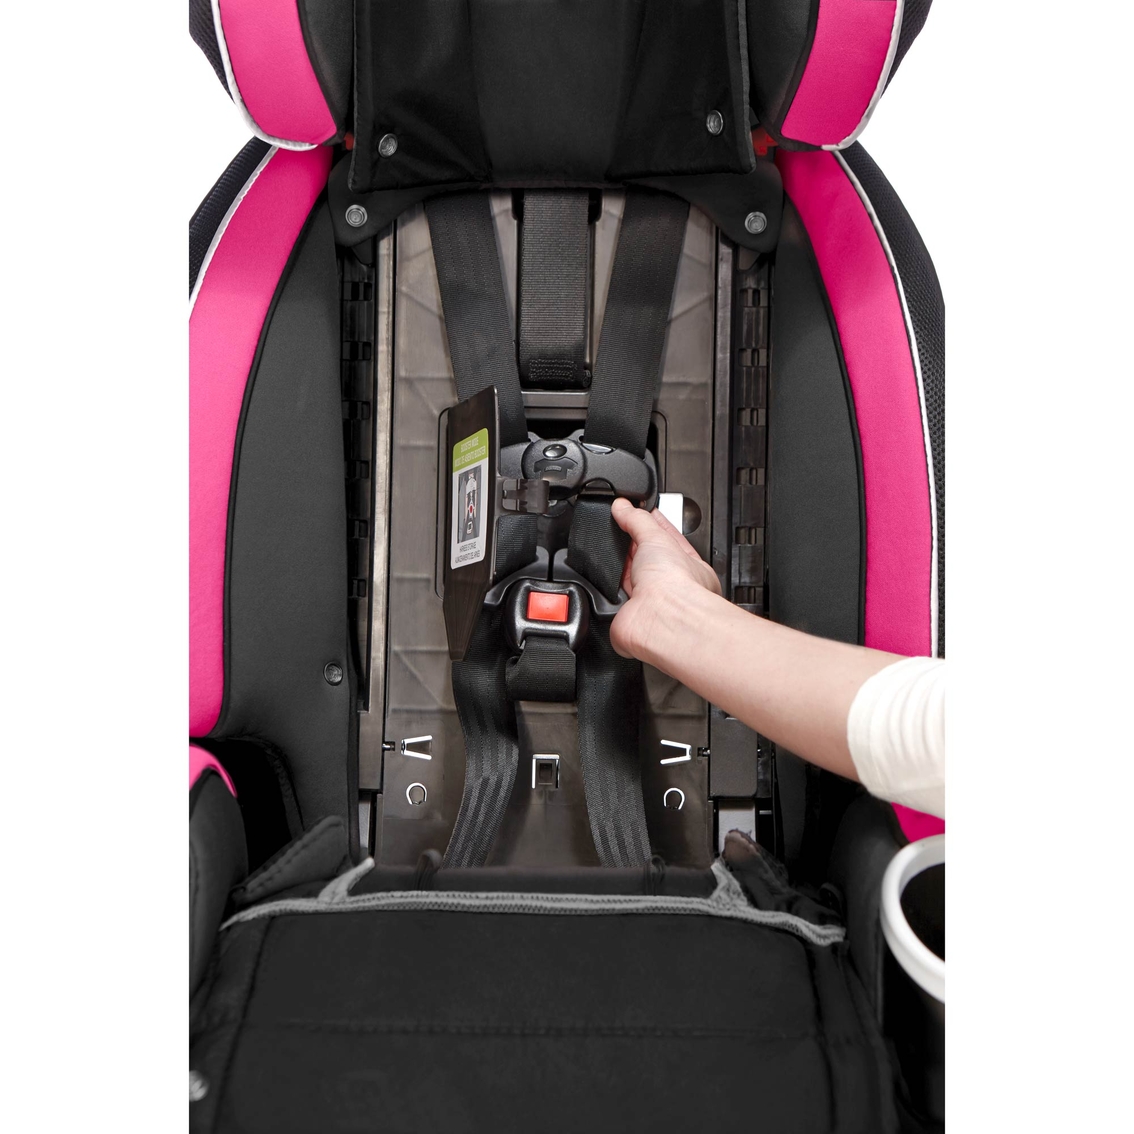 Graco 4Ever All in One Car Seat - Image 3 of 4